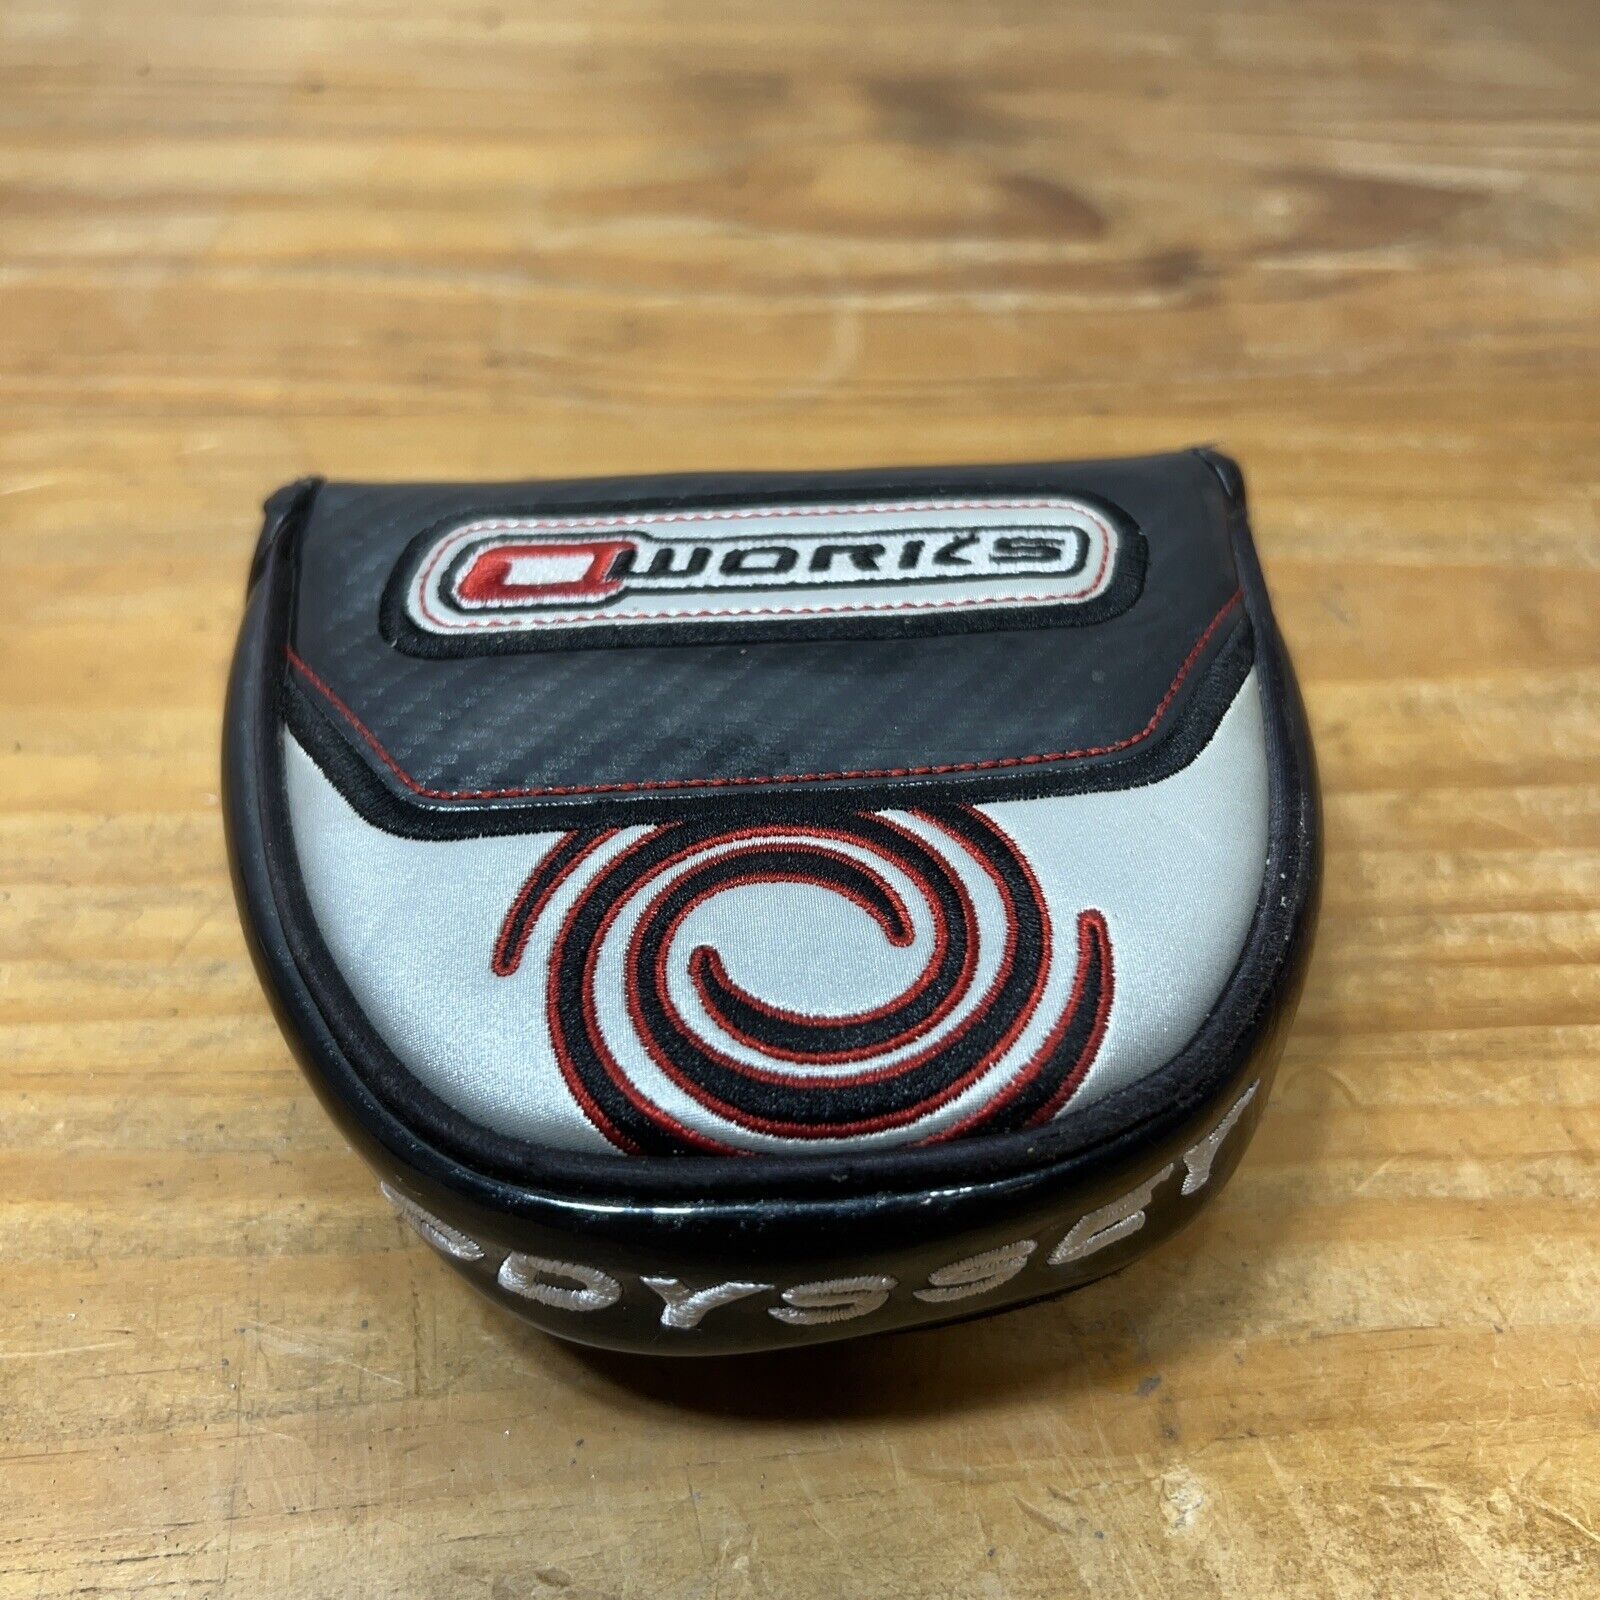 Odyssey O-Works Mallet Putter Cover - Black/Silver/Red - Great Condition - $14.85